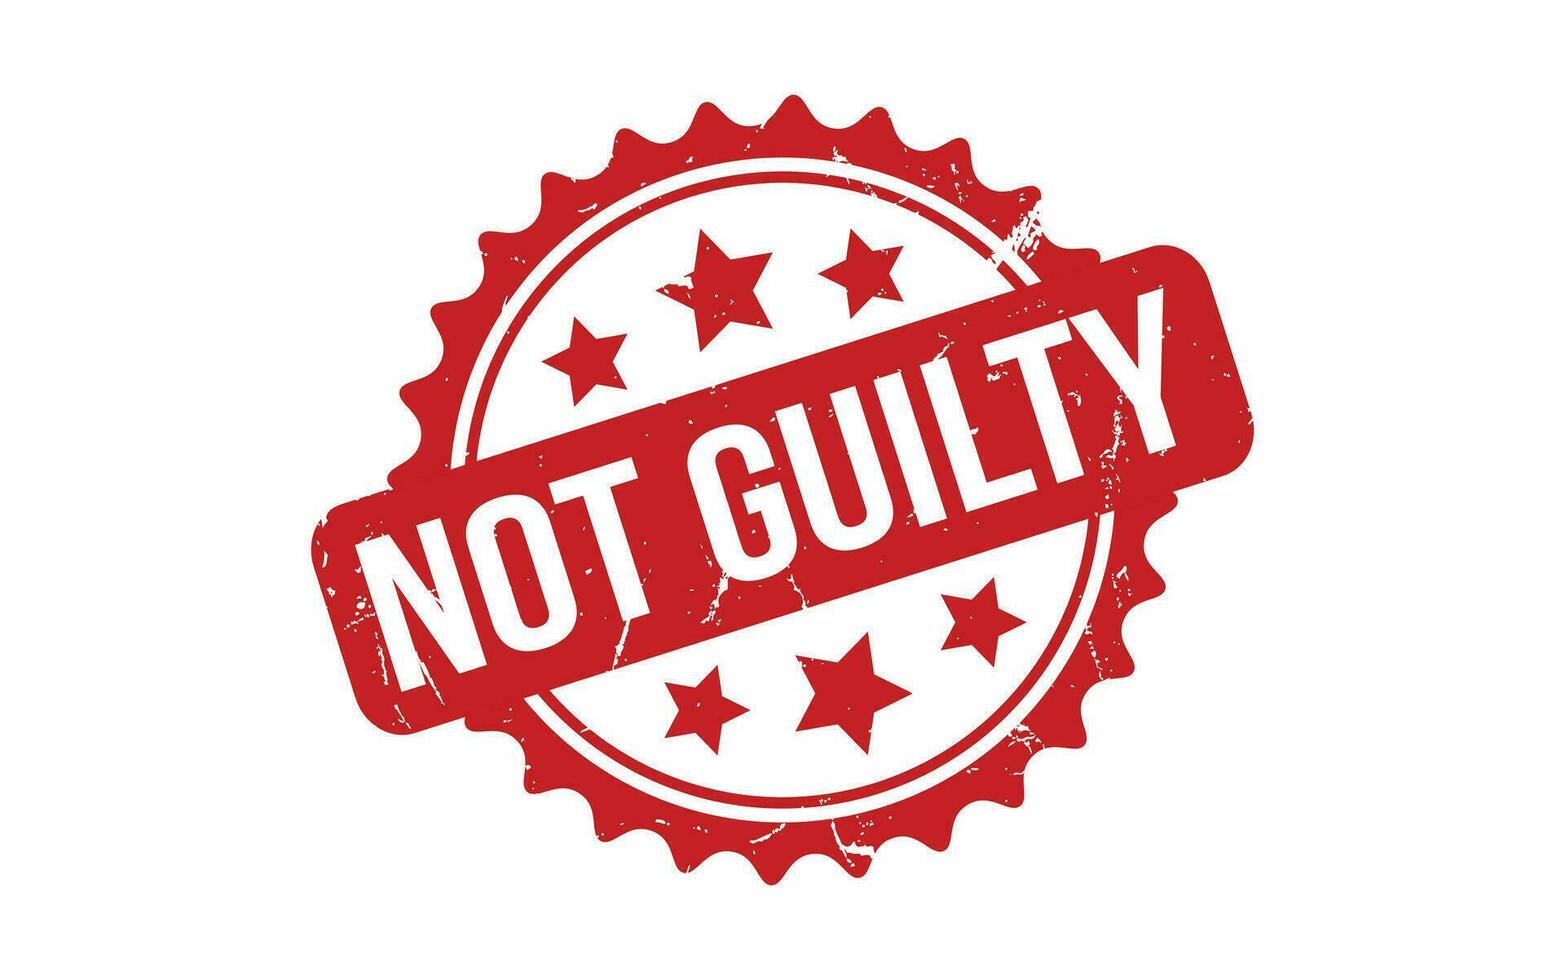 Not Guilty rubber grunge stamp seal vector